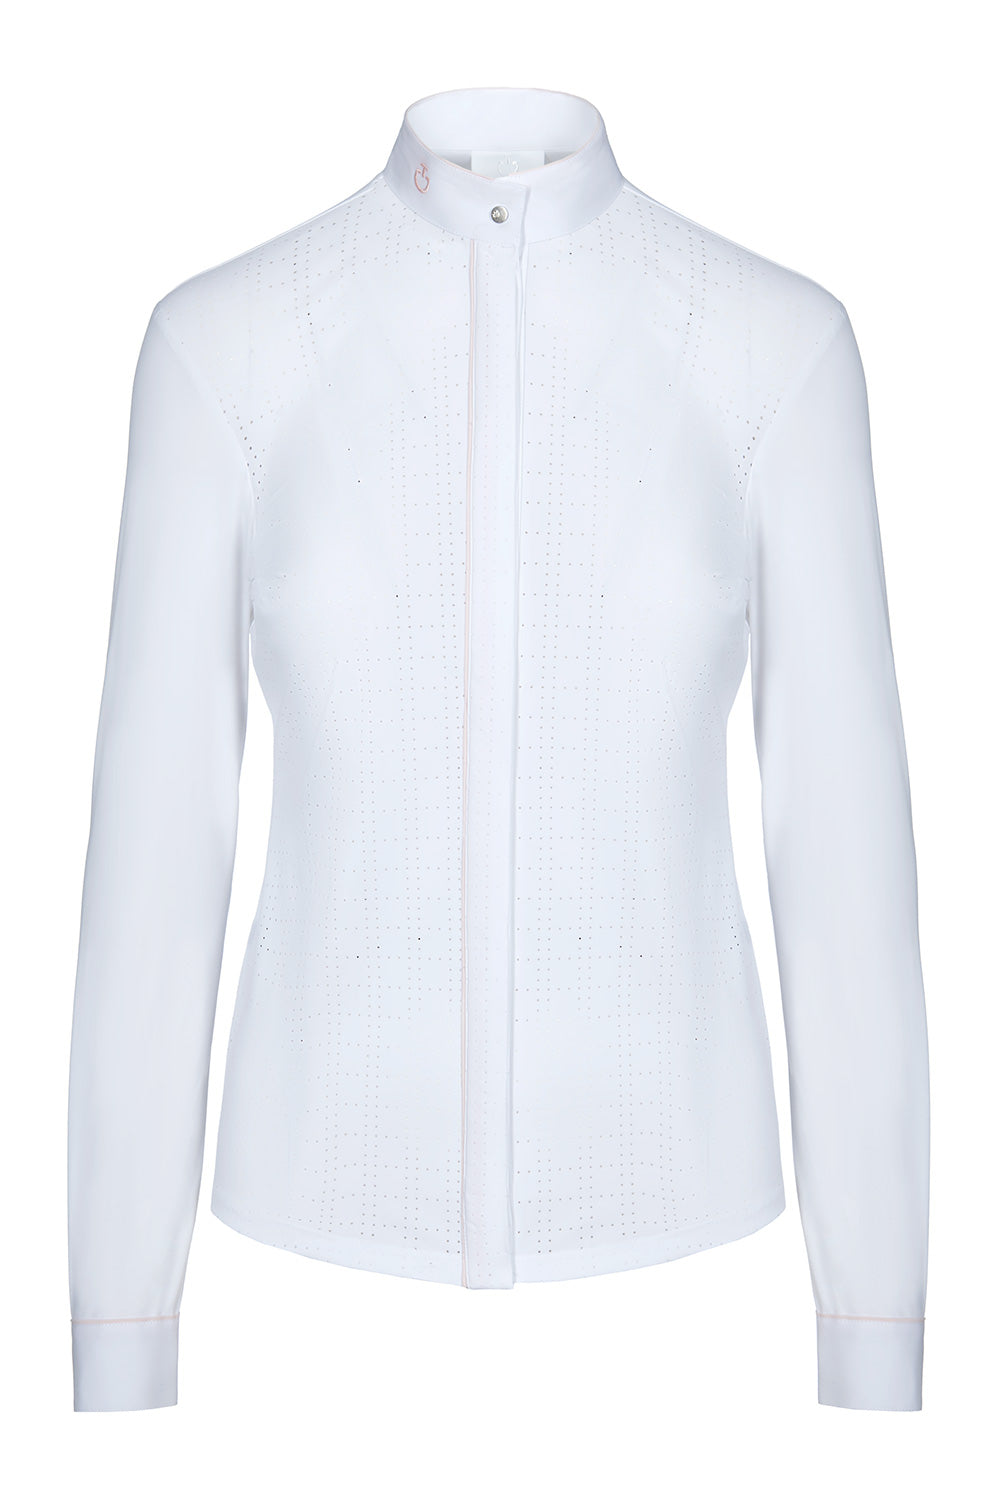 Cavalleria Toscana Perforated Competition Shirt with Piping - Luxe EQ